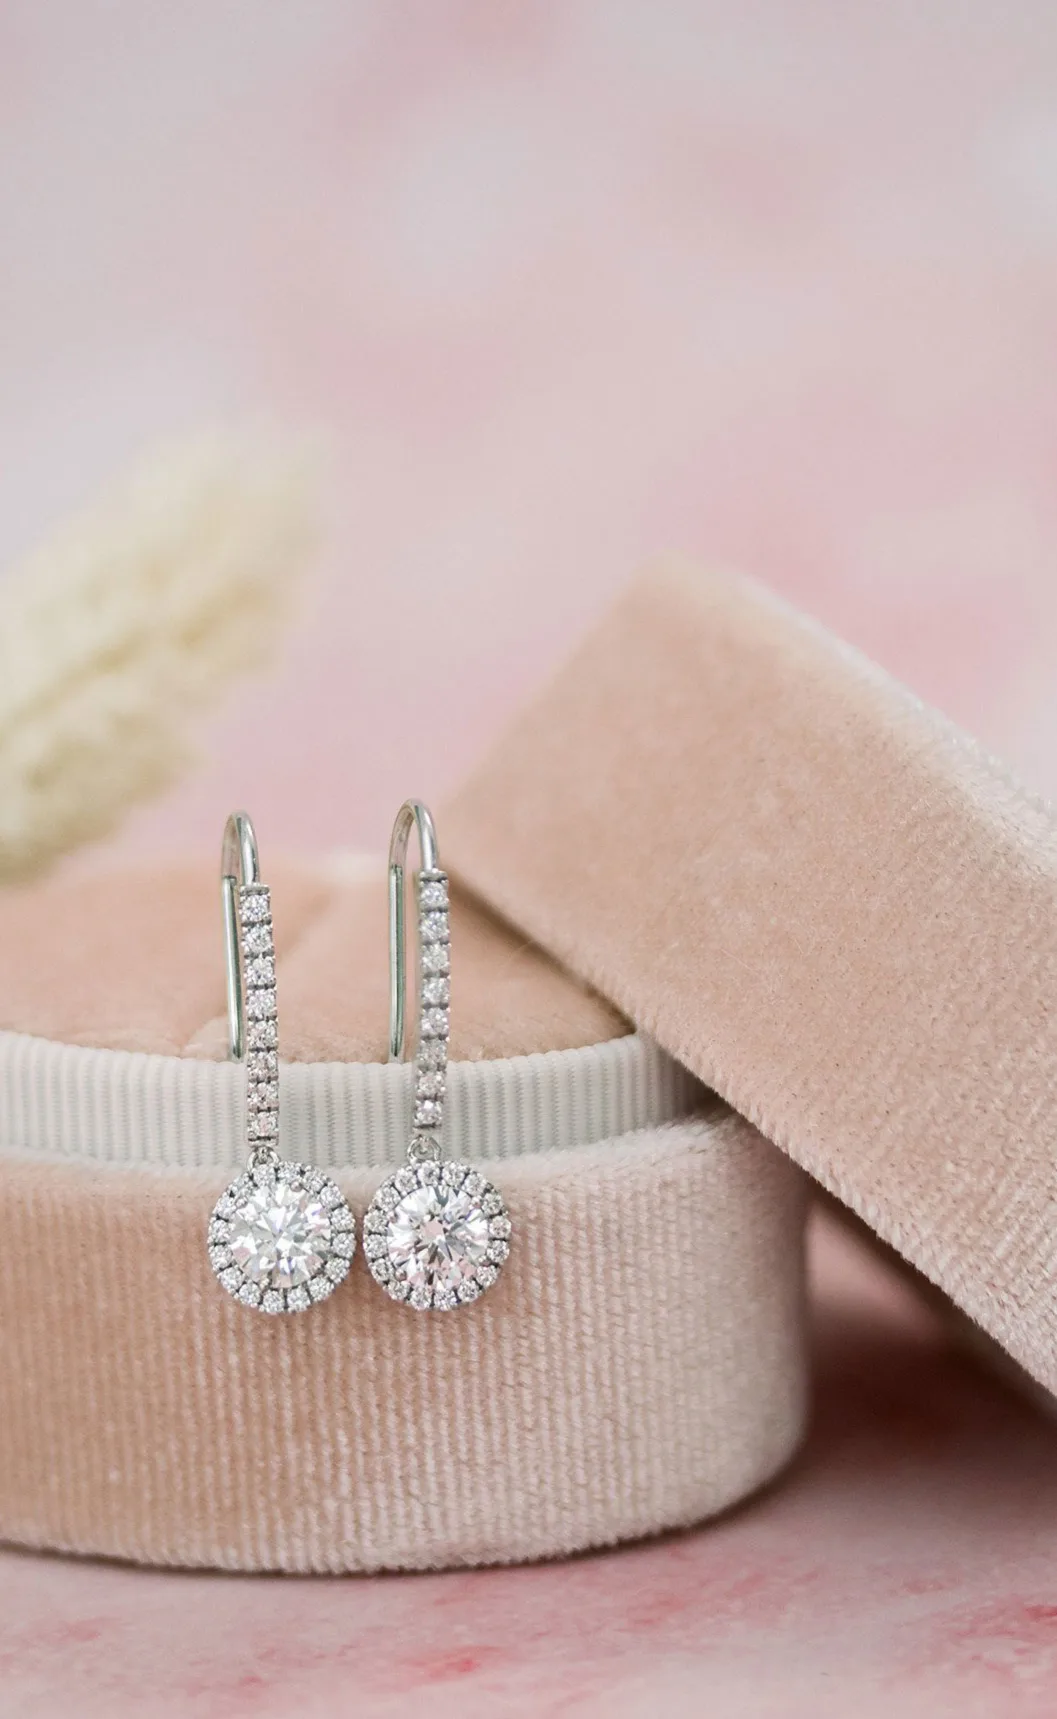 Exceptional Quality Round Lab Created Diamonds set in Single Halo Round Diamond Drop Earrings